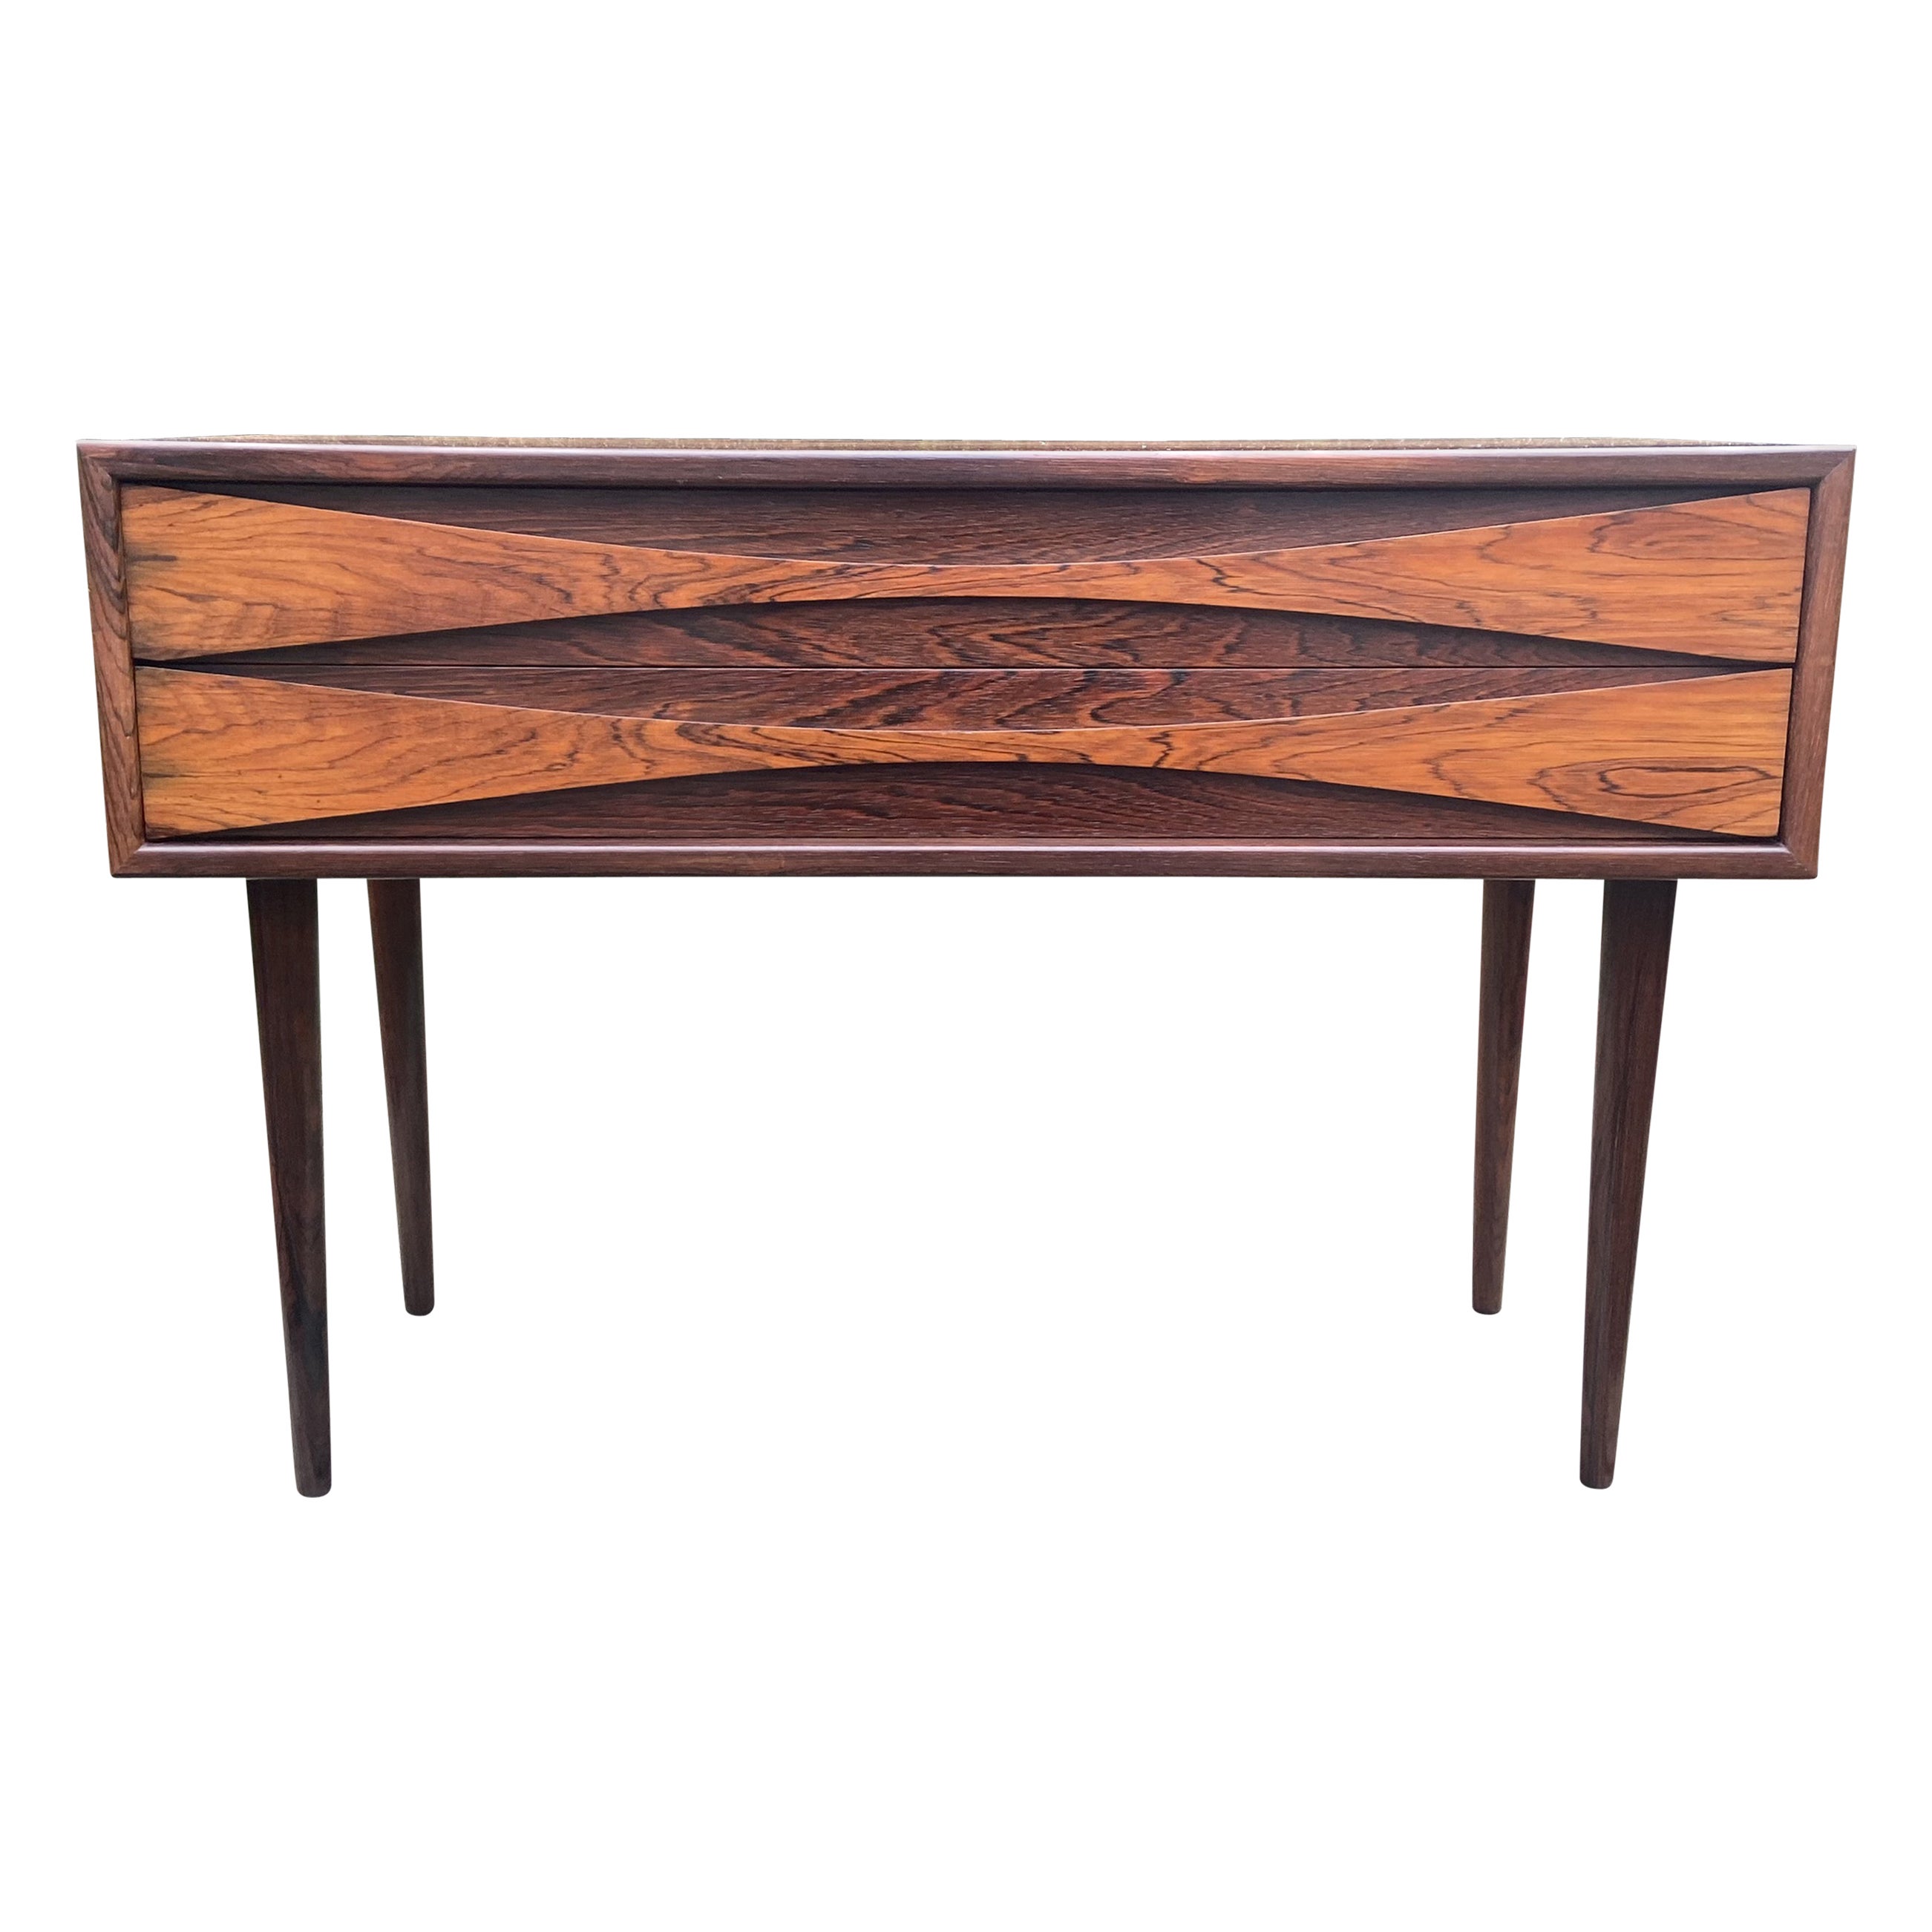 Two Drawer Chest in Rosewood by Niels Clausen for N.C, Mobler